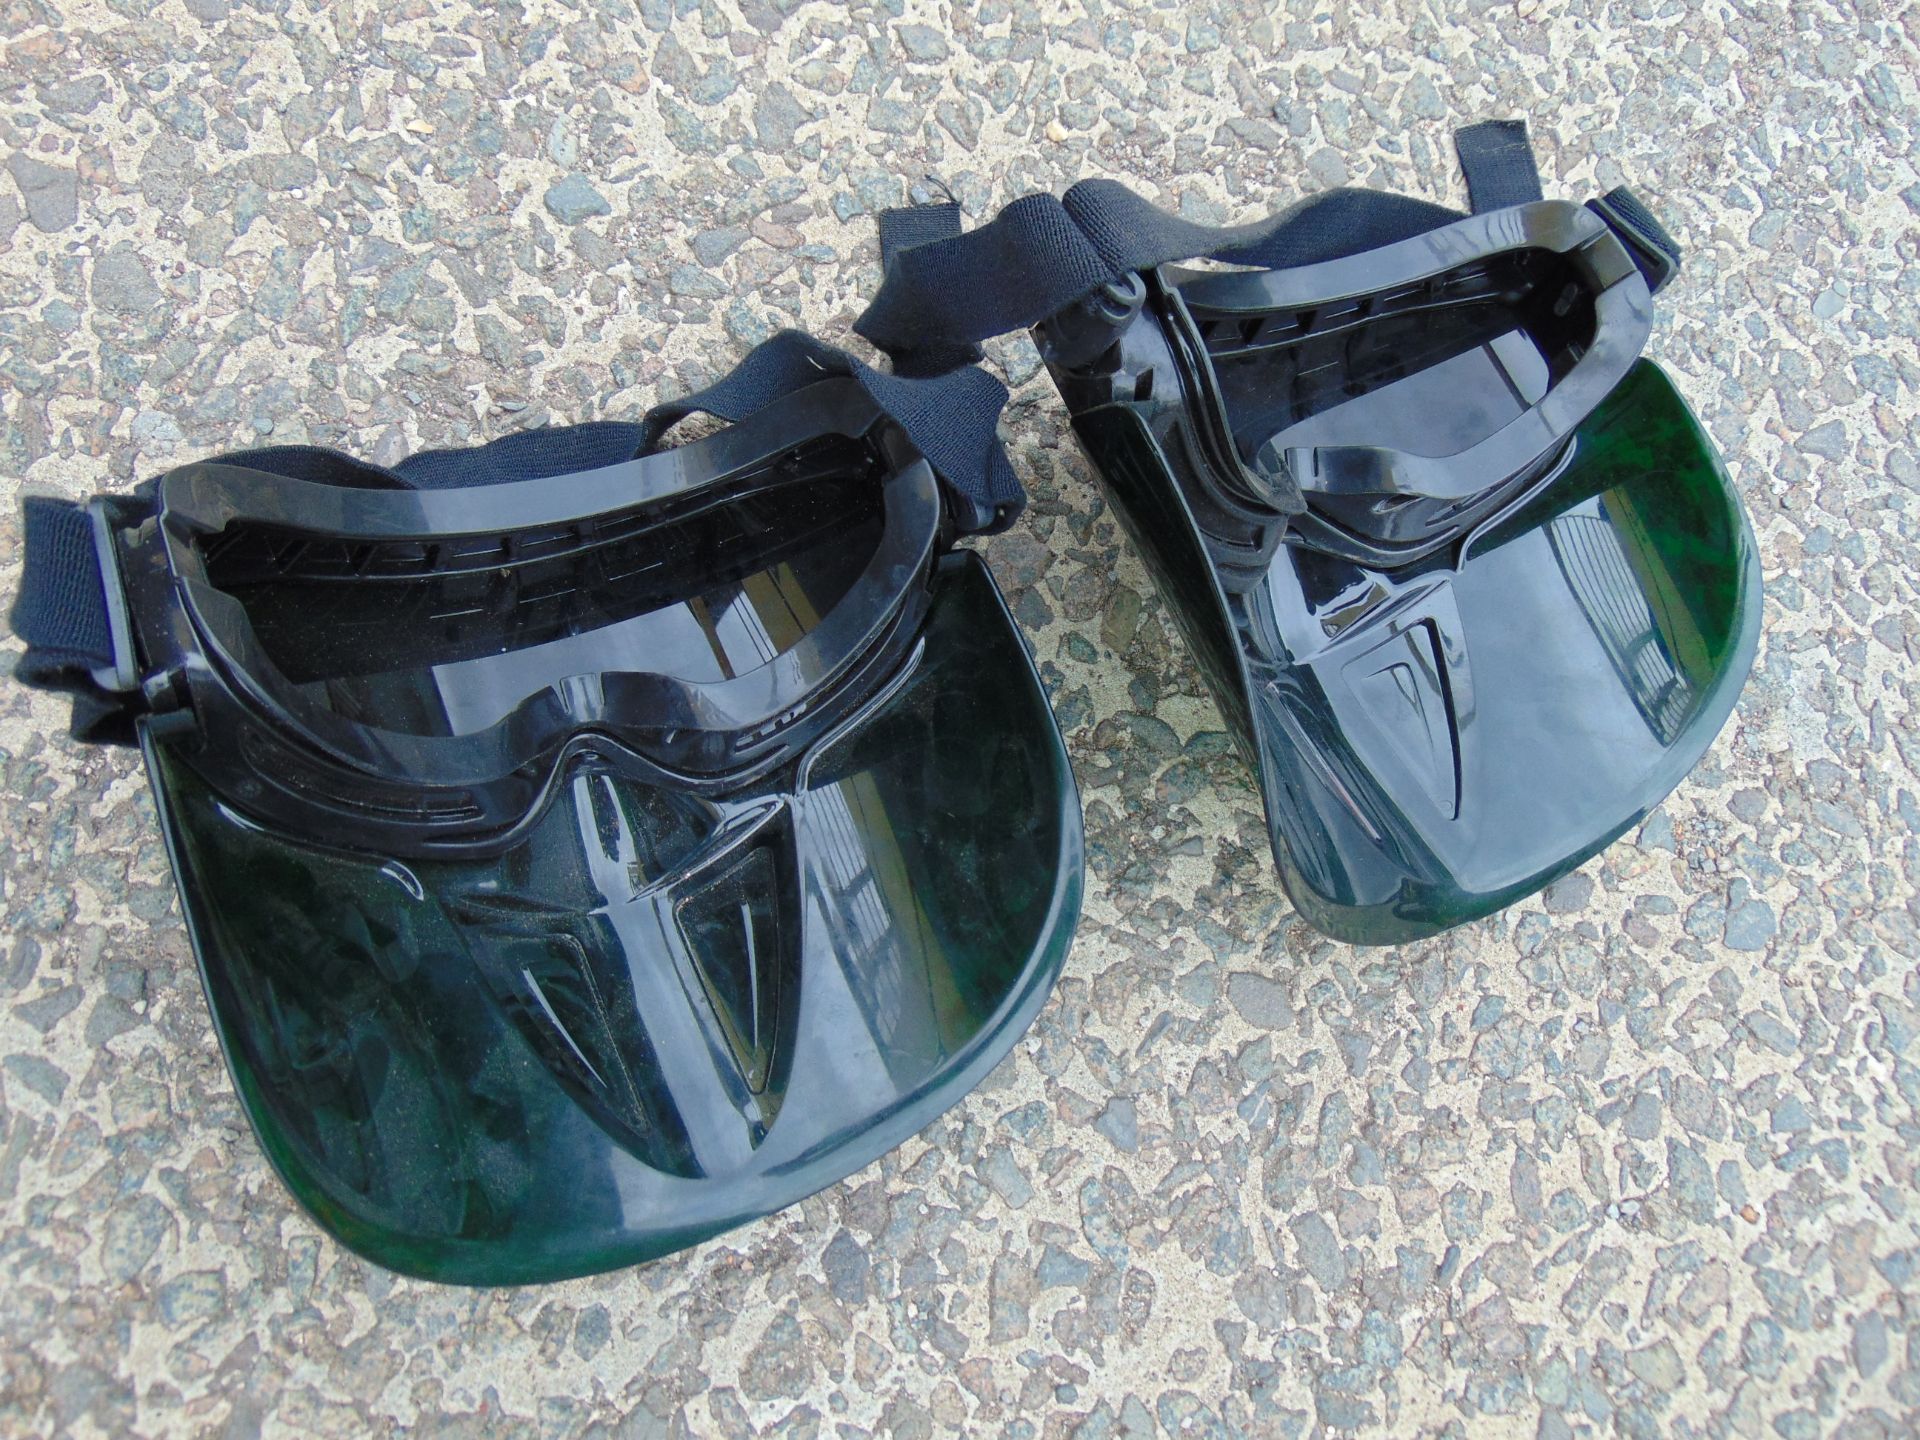 2 x Monogoggle XTR Safety Goggles C/W Face Shields - Image 5 of 6